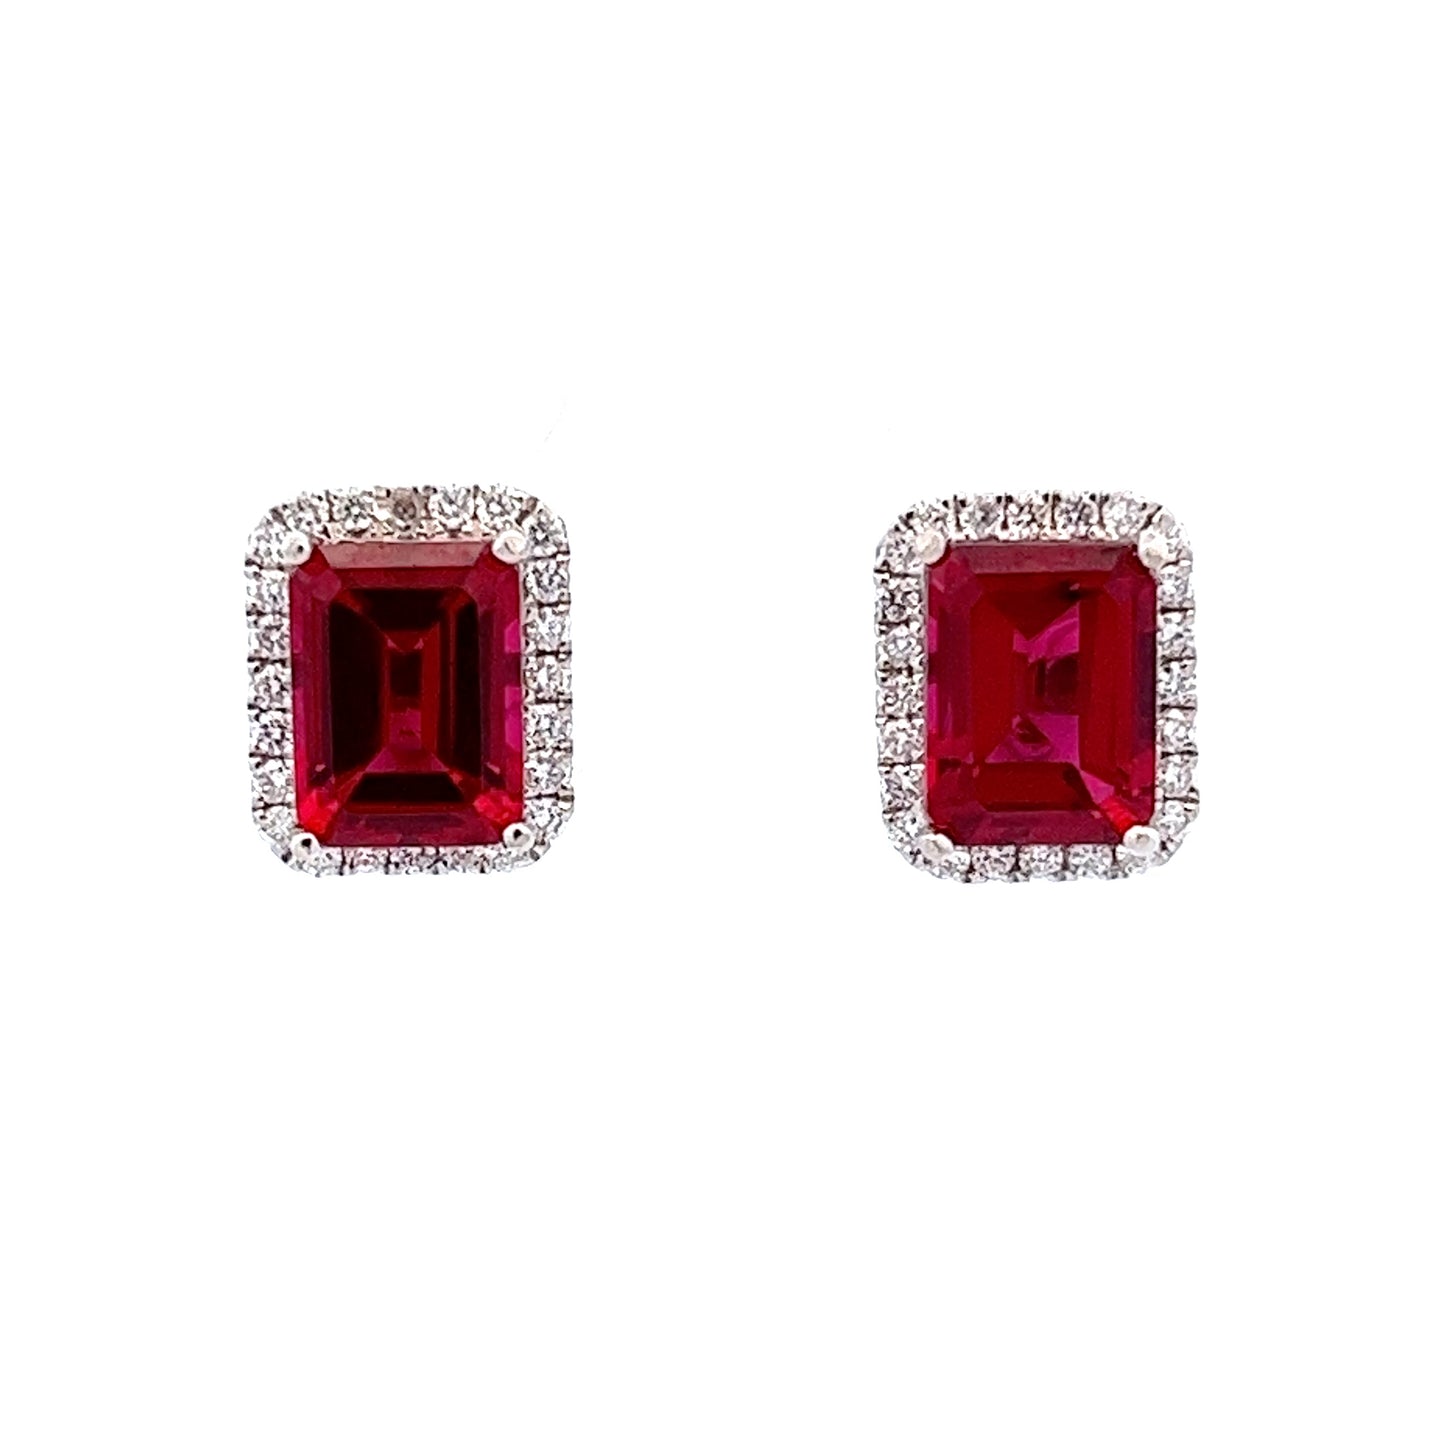 4.00ct total weight emerald cut lab grown ruby and diamond earrings